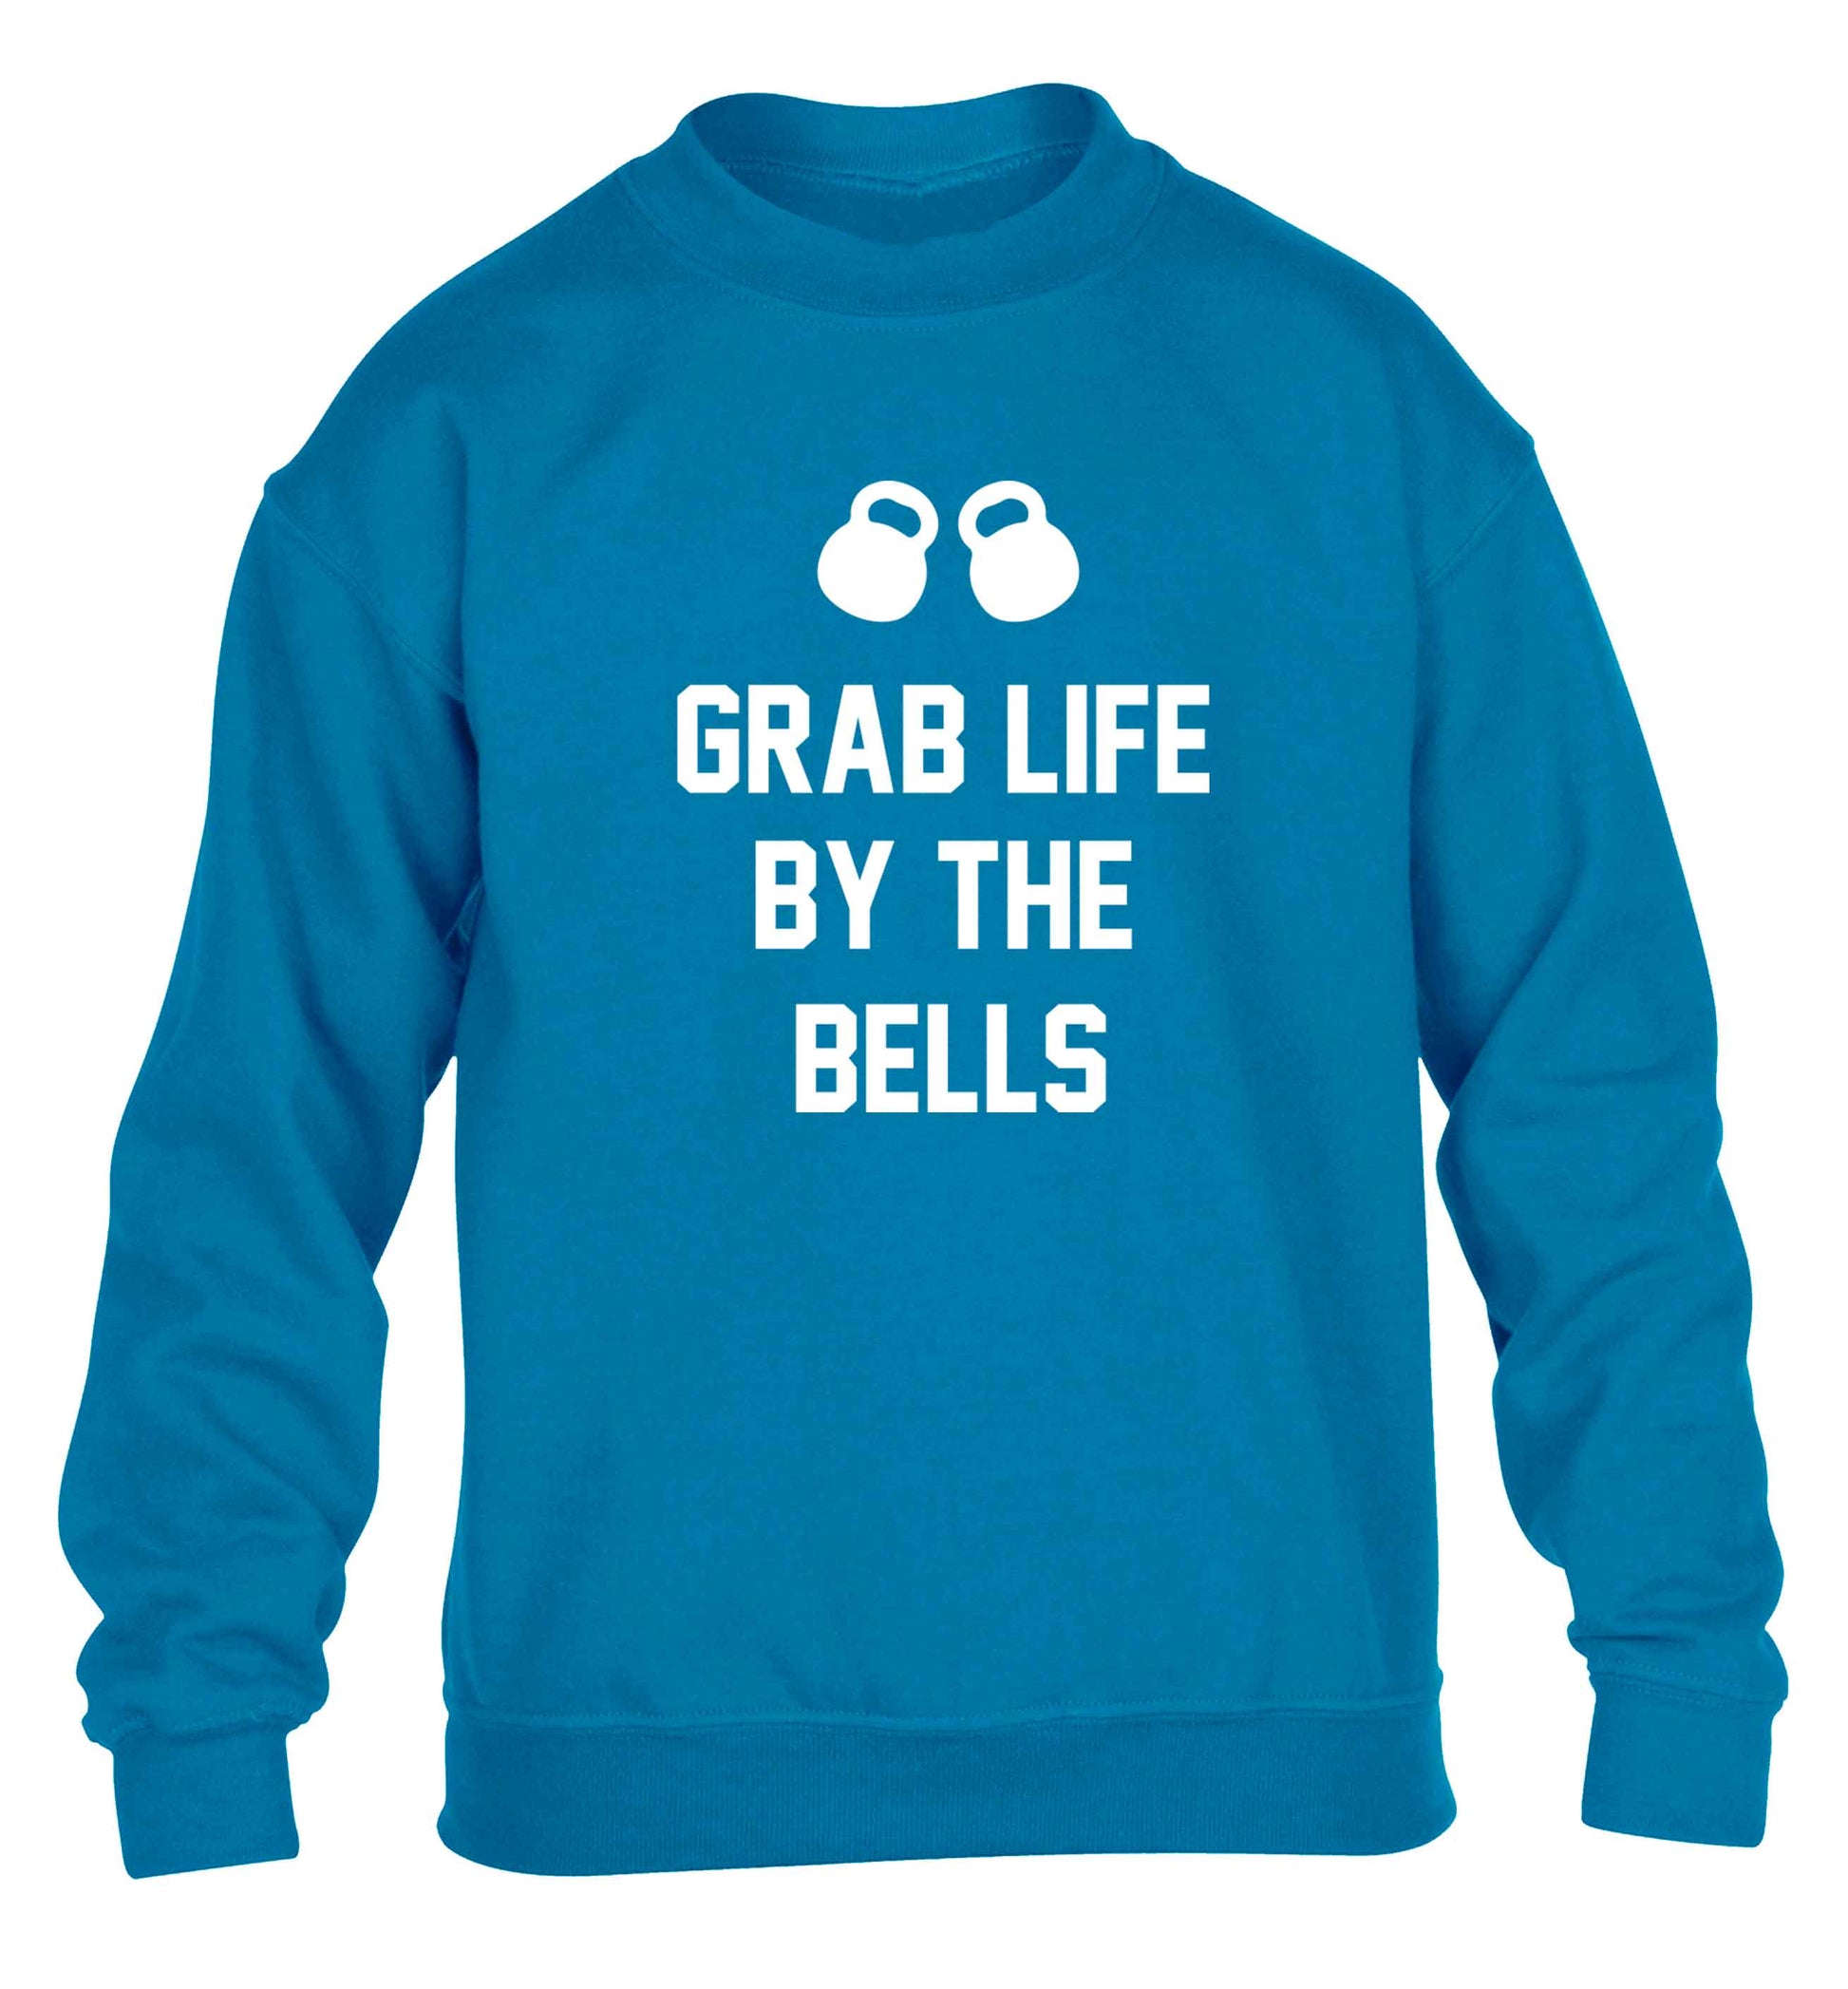 Grab life by the bells children's blue sweater 12-13 Years